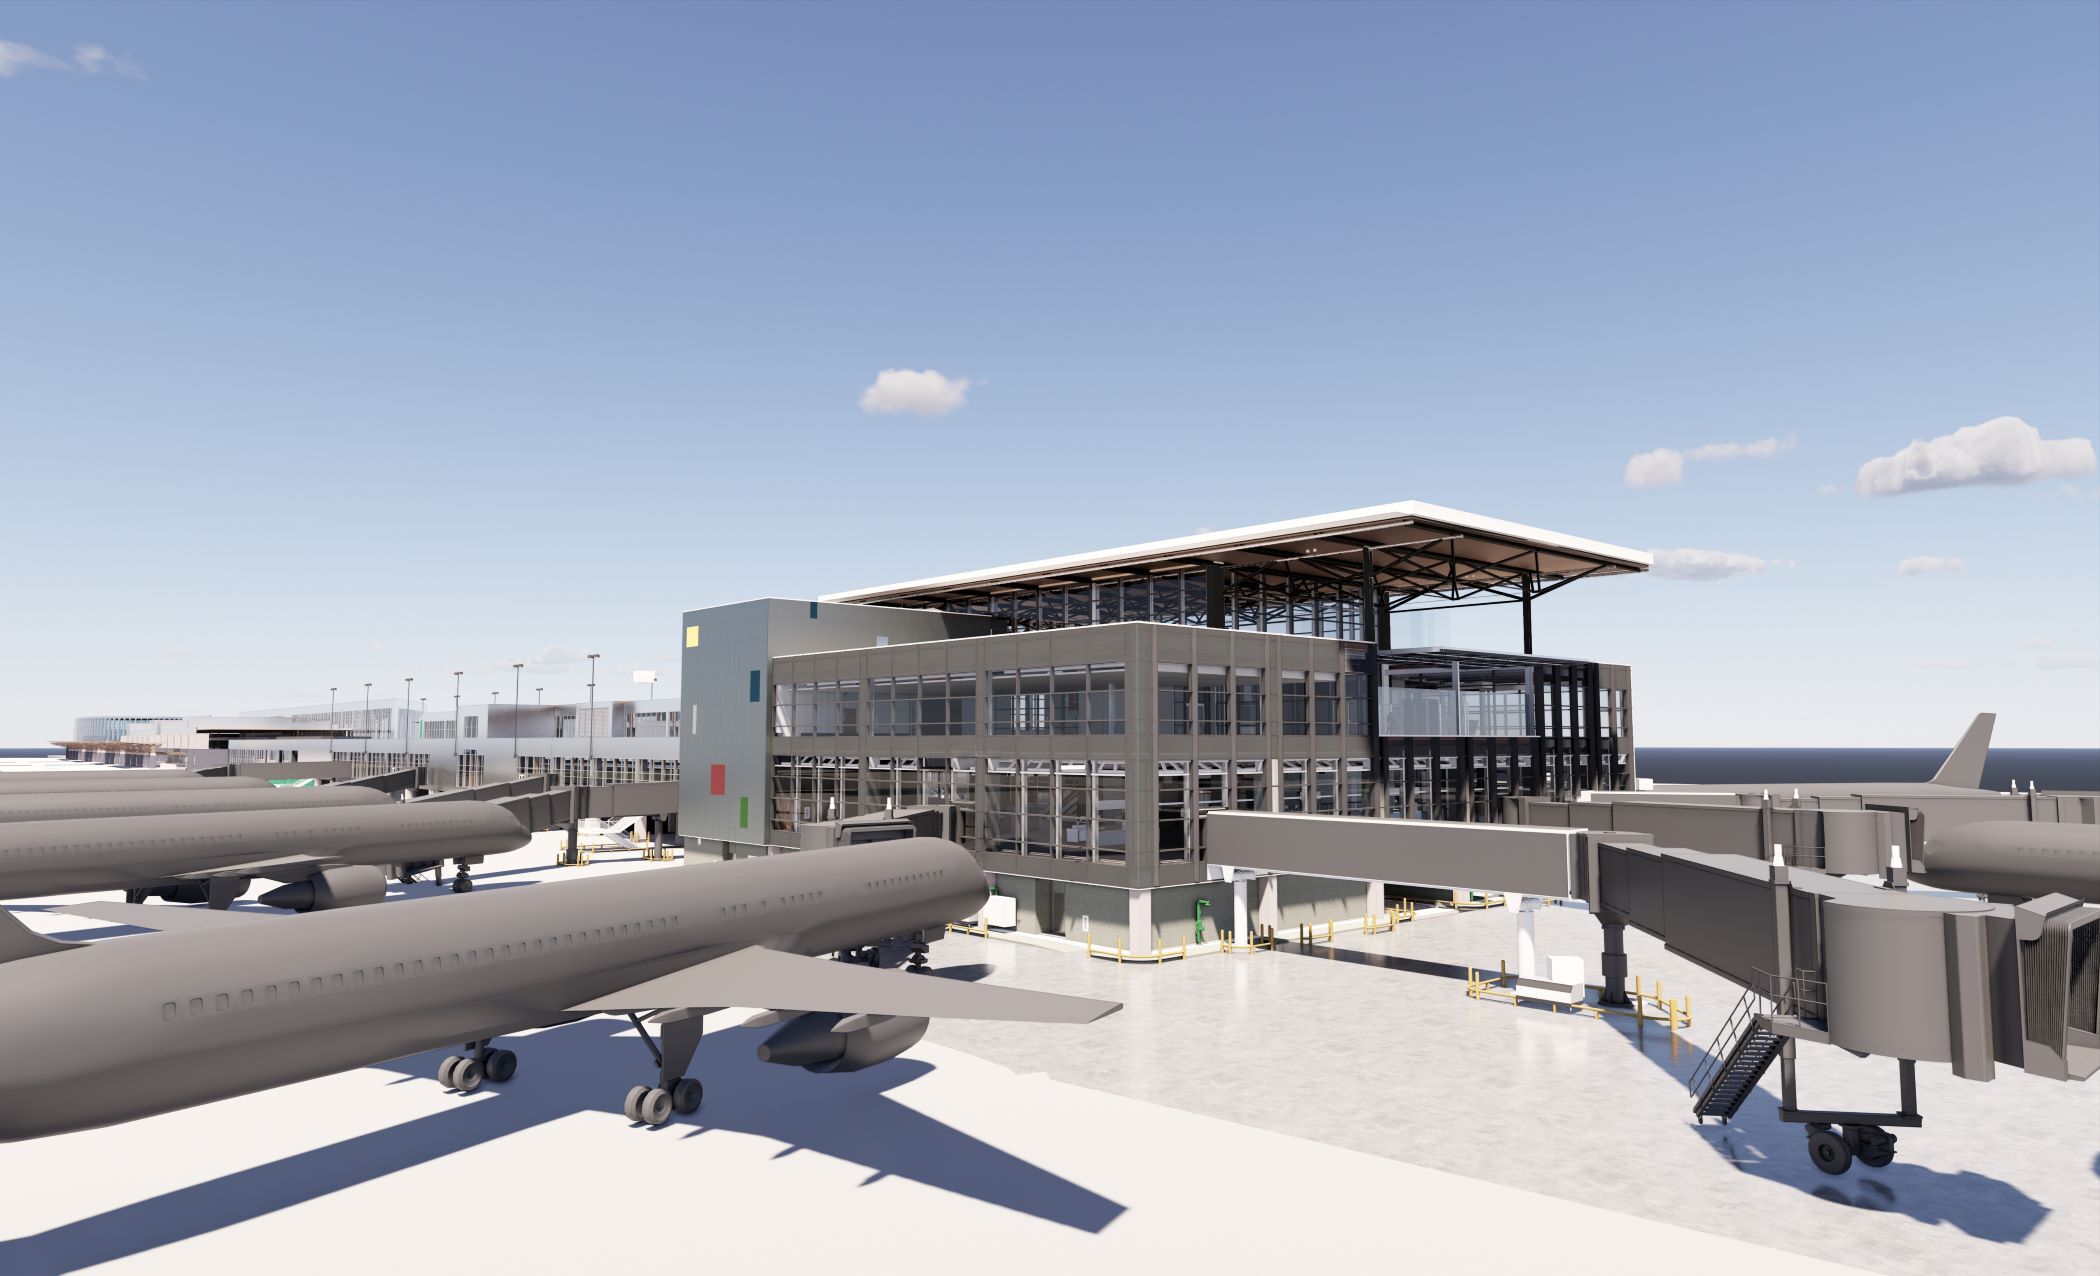 Austin-Bergstrom International Airport plans to start construction later this year on a $165 million expansion that will bring three new gates to the airport. (Austin-Bergstrom International Airport)